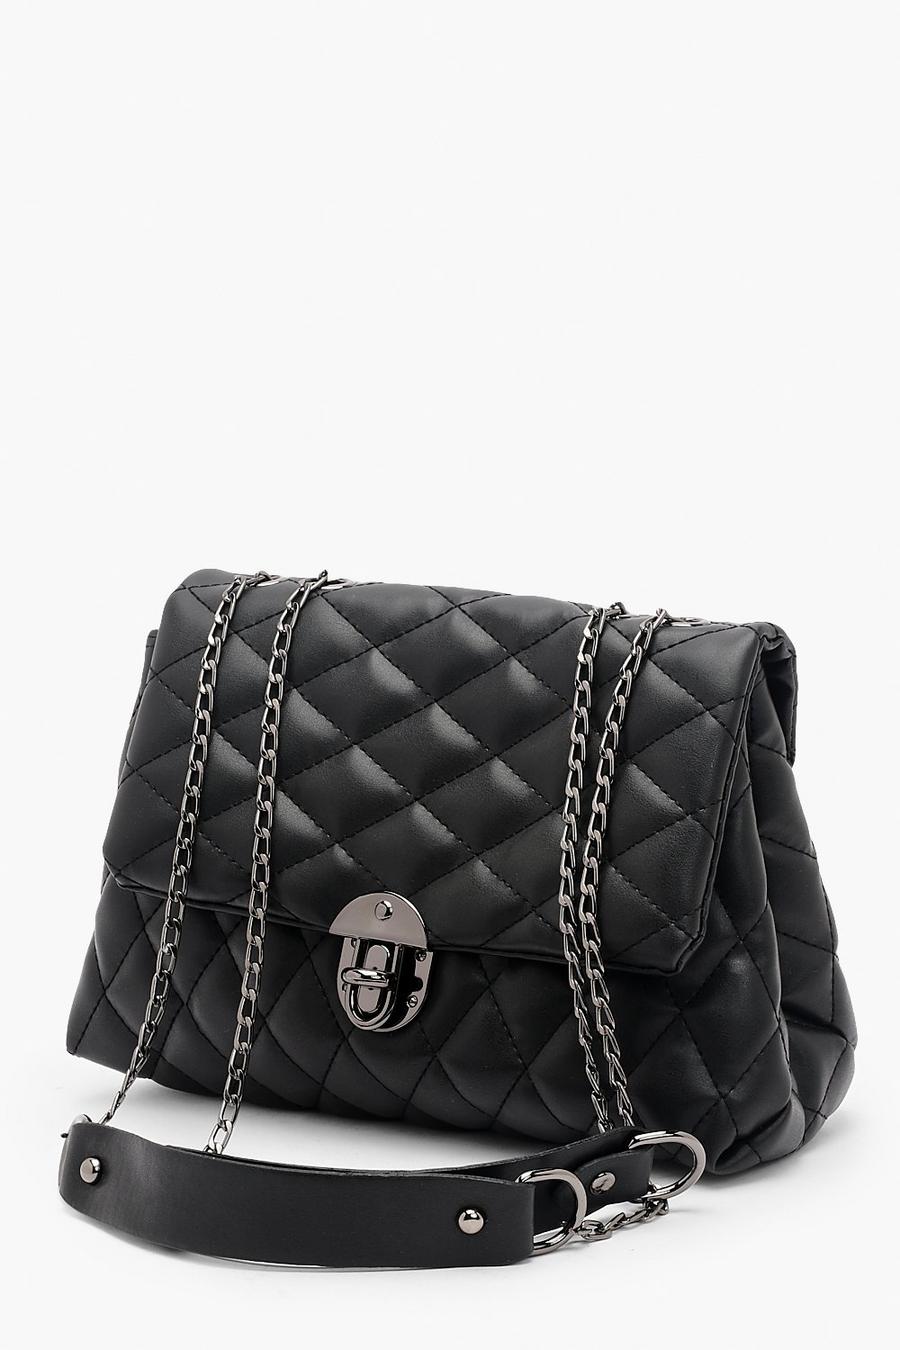 Black noir Quilted Chain Cross Body Bag